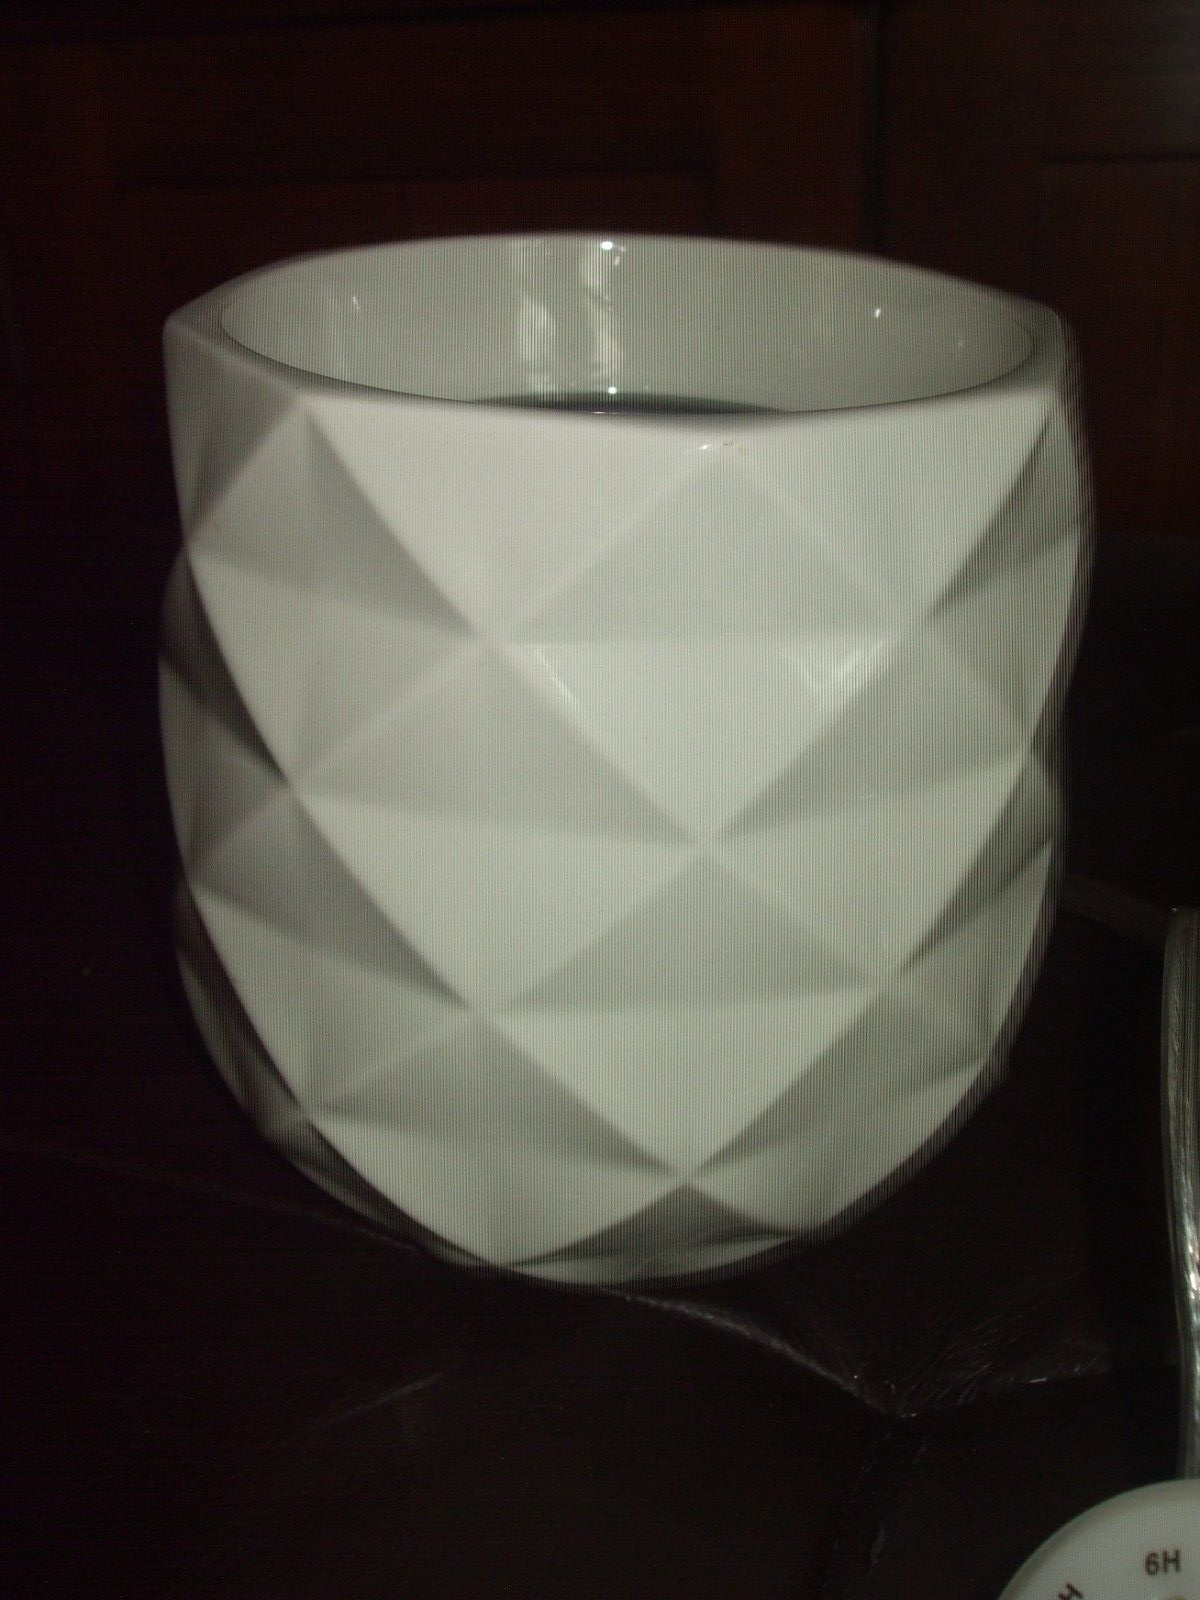 Primary image for Yankee Candle White Ceramic Beveled Diamond Electric Wax Warmer #SPW-132